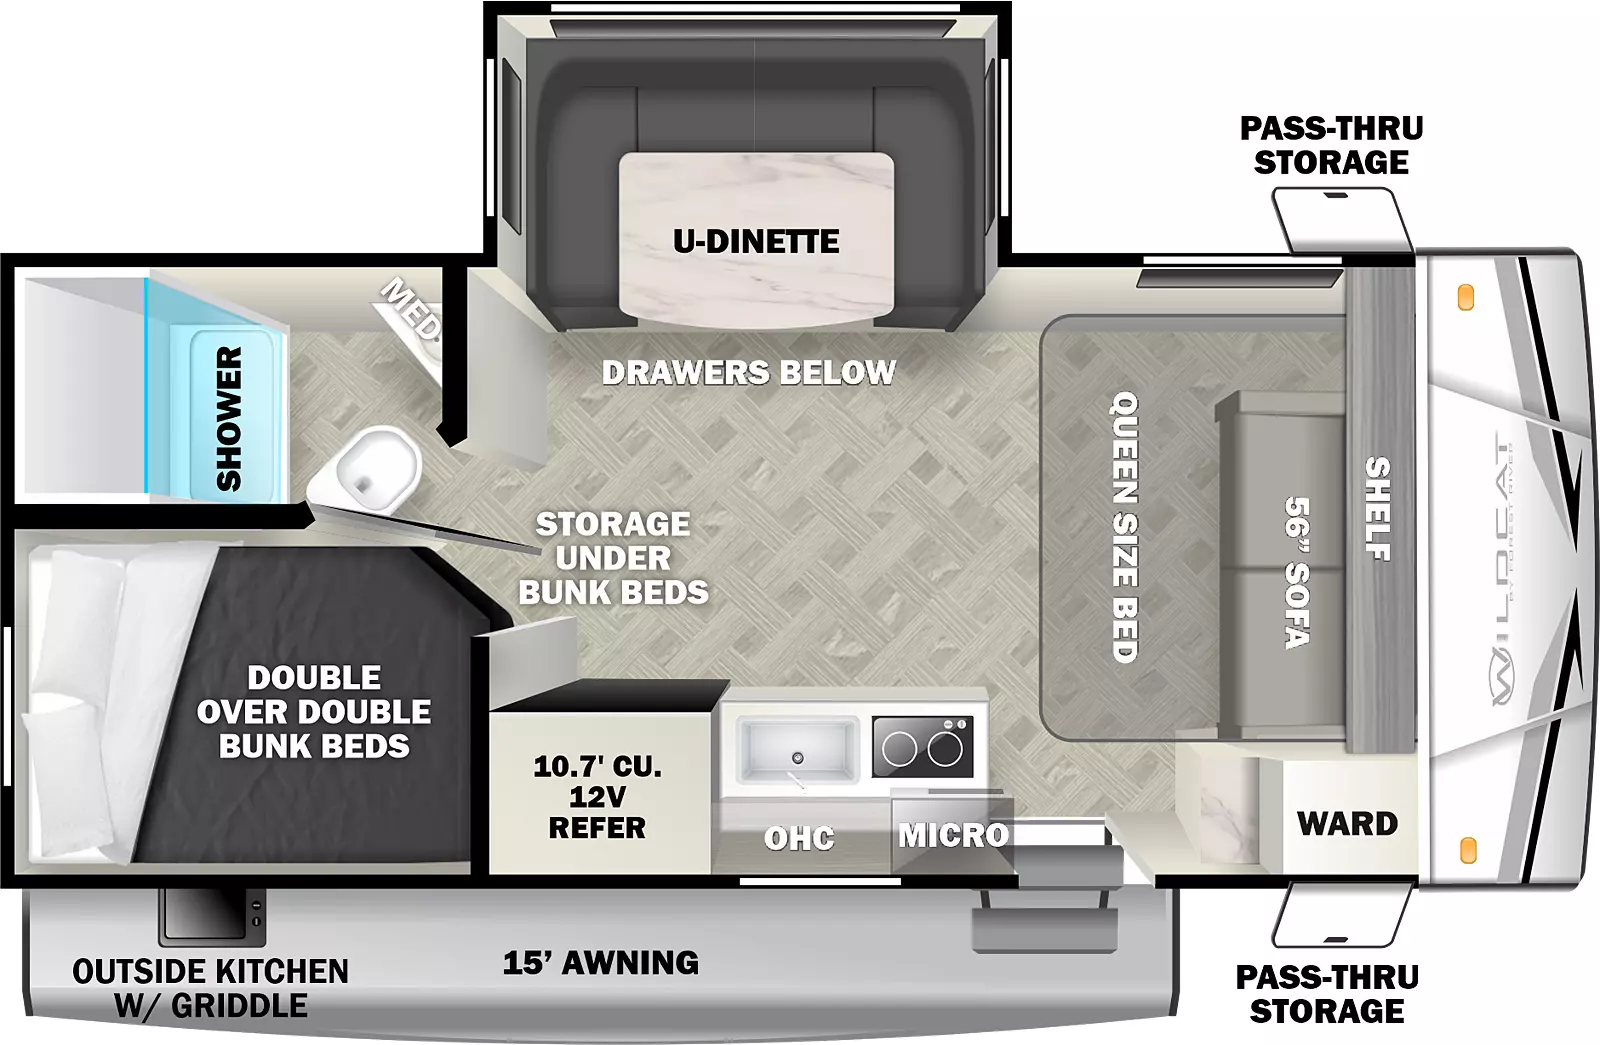 The 182DBX has one slideout and one entry. Exterior features front pass through storage, outside kitchen with griddle, and 15 foot awning. Interior layout front to back: sofa with queen size bed that folds down with shelf above and door side wardrobe; off-door side u-dinette slideout with drawers below; door side entry, kitchen counter with cooktop, sink, microwave and overhead cabinet, and 12V refrigerator; rear off-door side full bathroom with medicine cabinet; rear door side double over double bunk beds with storage under bunk beds.